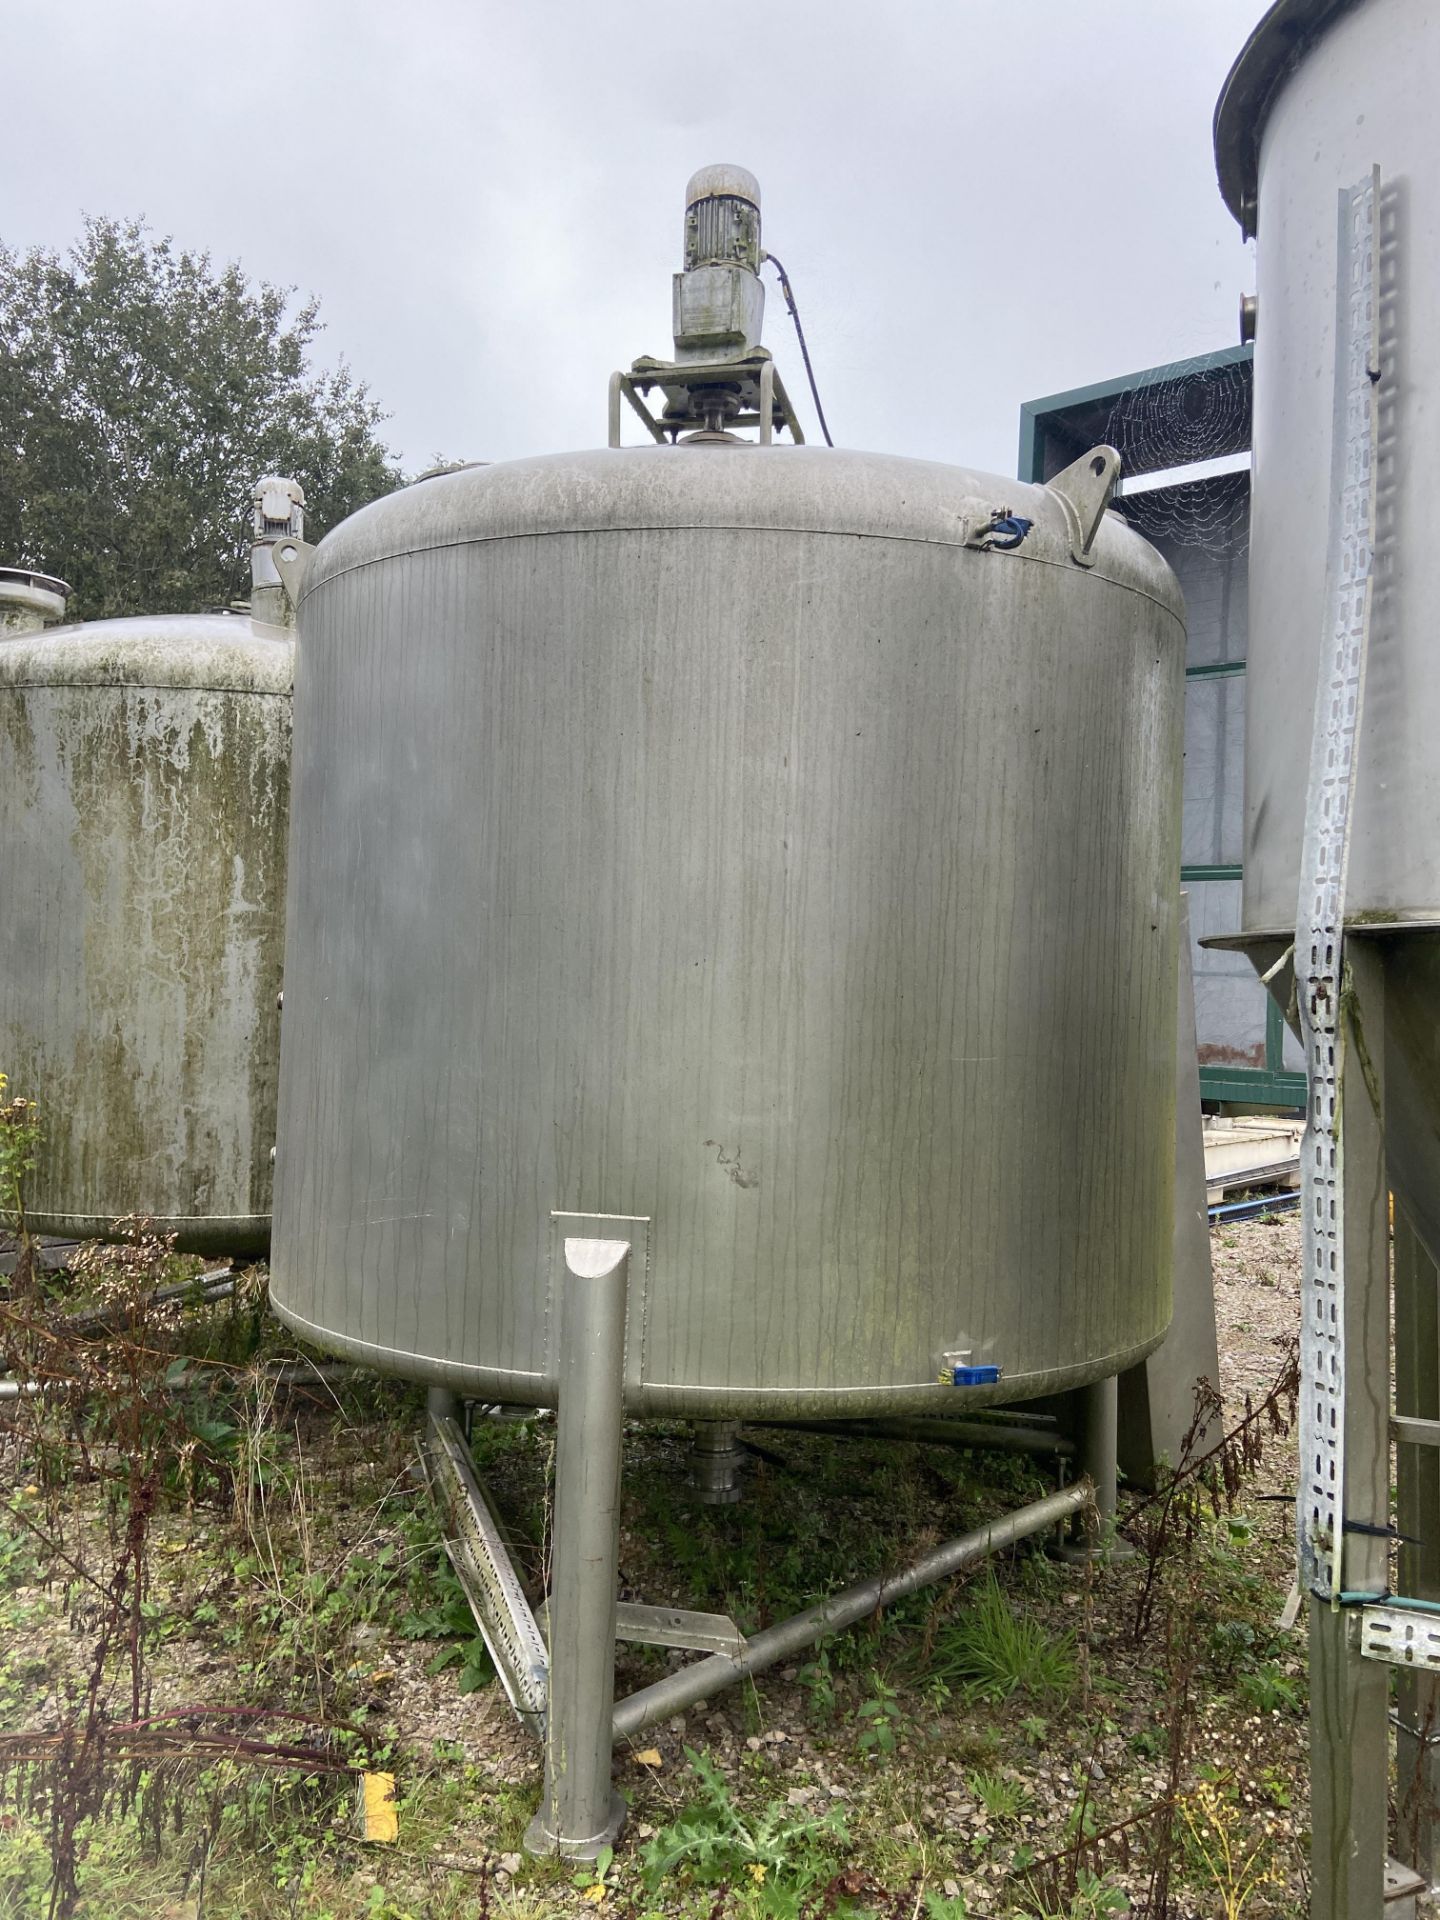 APV Process Plant & Machinery/ T Bibby 4,500 litre STAINLESS STEEL TANK, approx. 2.3m dia. x 1.6m - Image 2 of 4